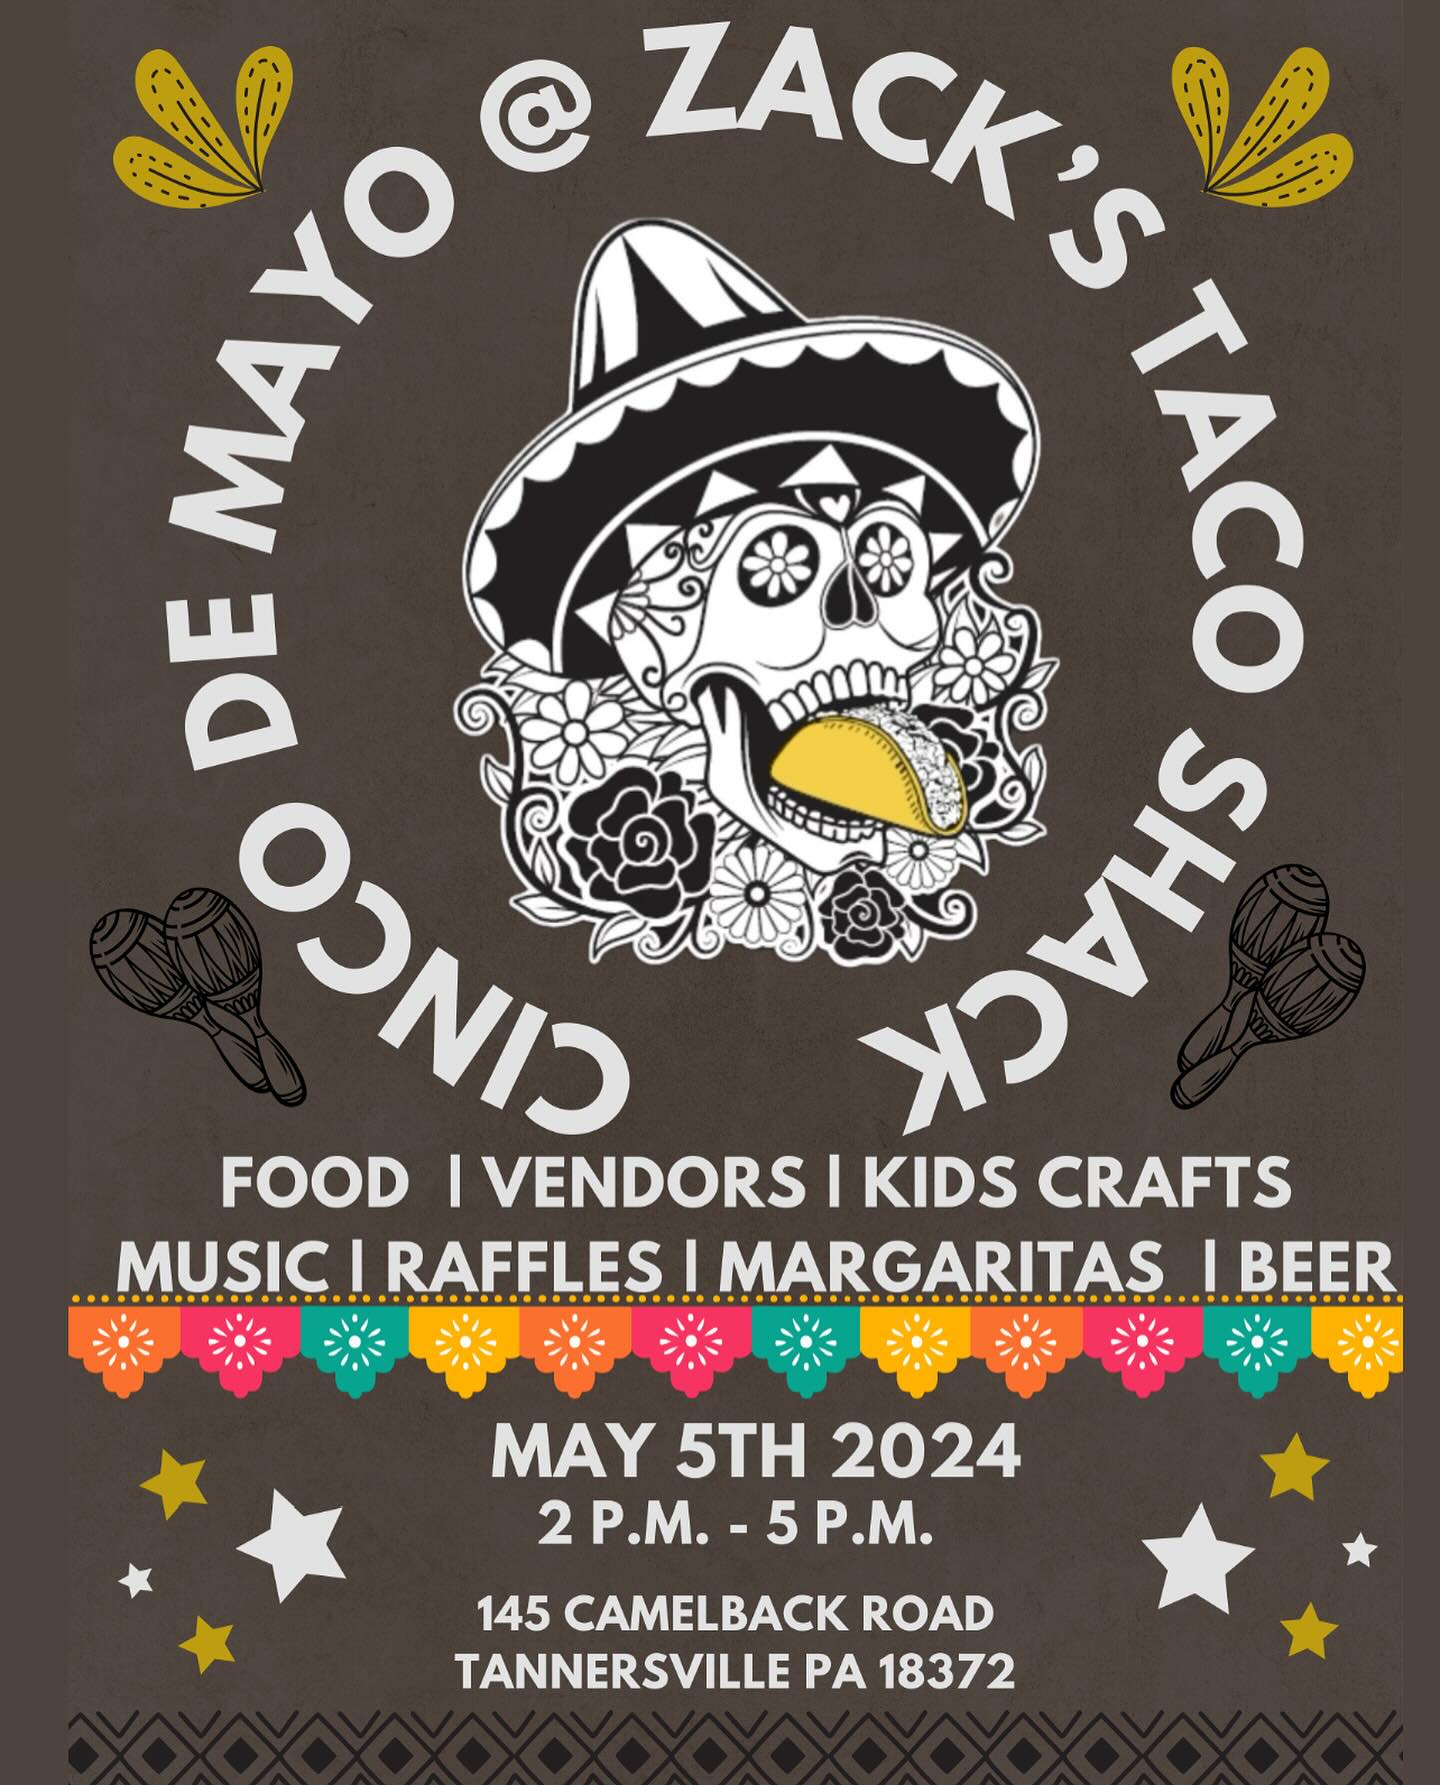 🌮 🪅💀CINCO DE MAYO @ ZACK’S TACO SHACK💀🪅🌮

We’re so excited to celebrate with some awesome vendors. Bring your families - lots to do for kids and local artist activities!